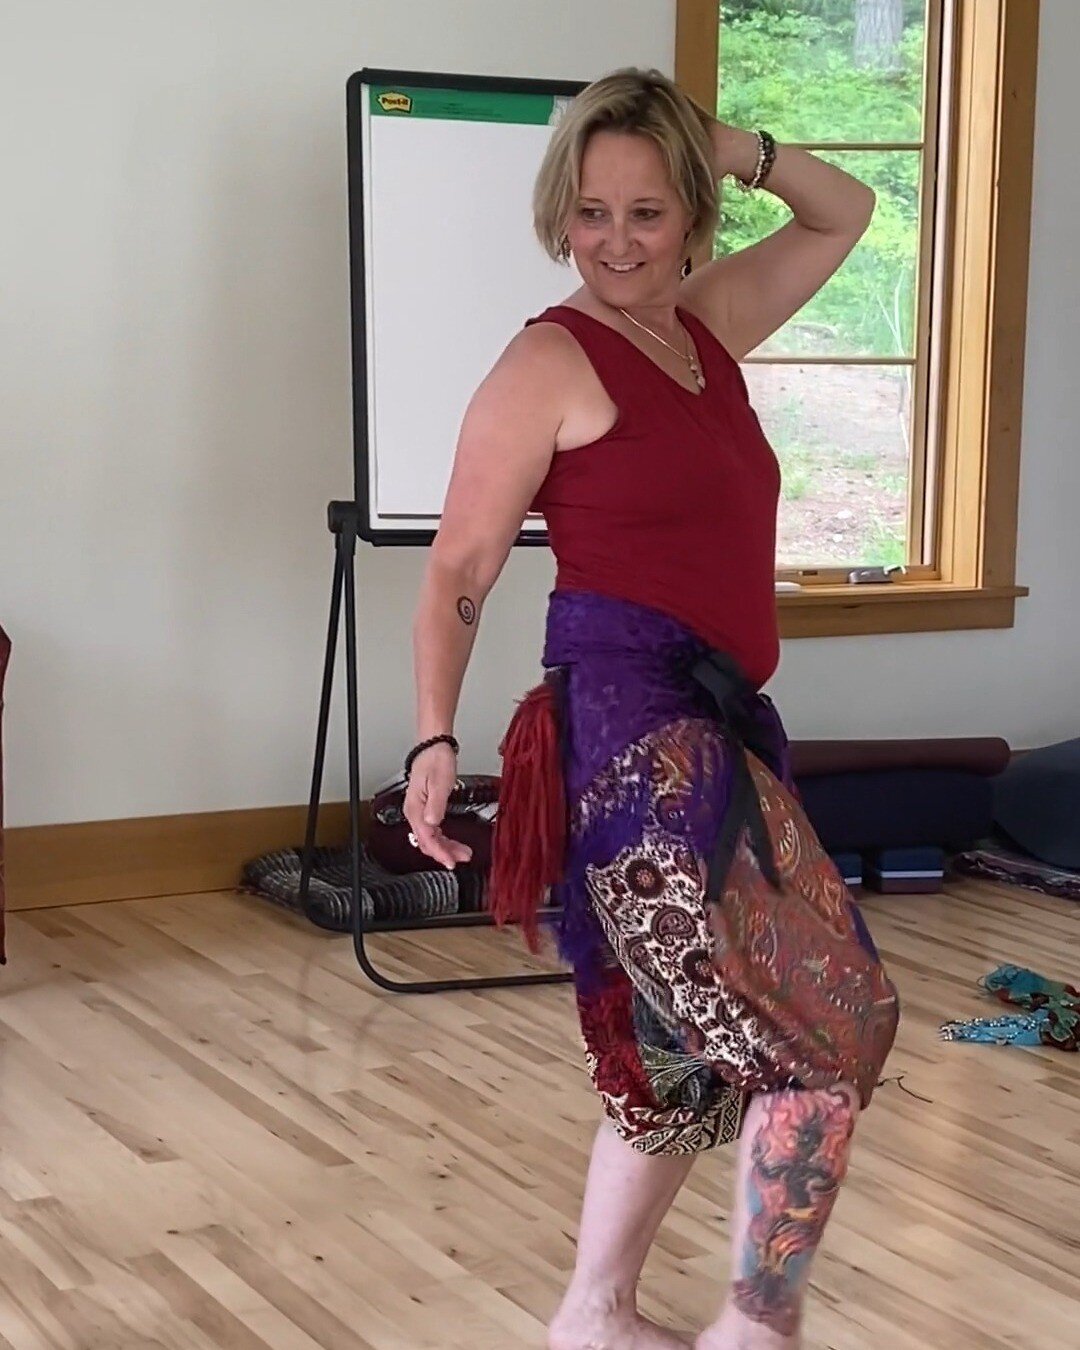 Belly-dance lessons with Jillybean -- videos from our retreat at the Whidbey Institute!

#yogatherapy #yogateacher #yogacommunity #yogaflow #buteyko #restoringprana #nasalbreathing #respiration #prana #pranayama #myofunctionaltherapy #mouthtape #asth